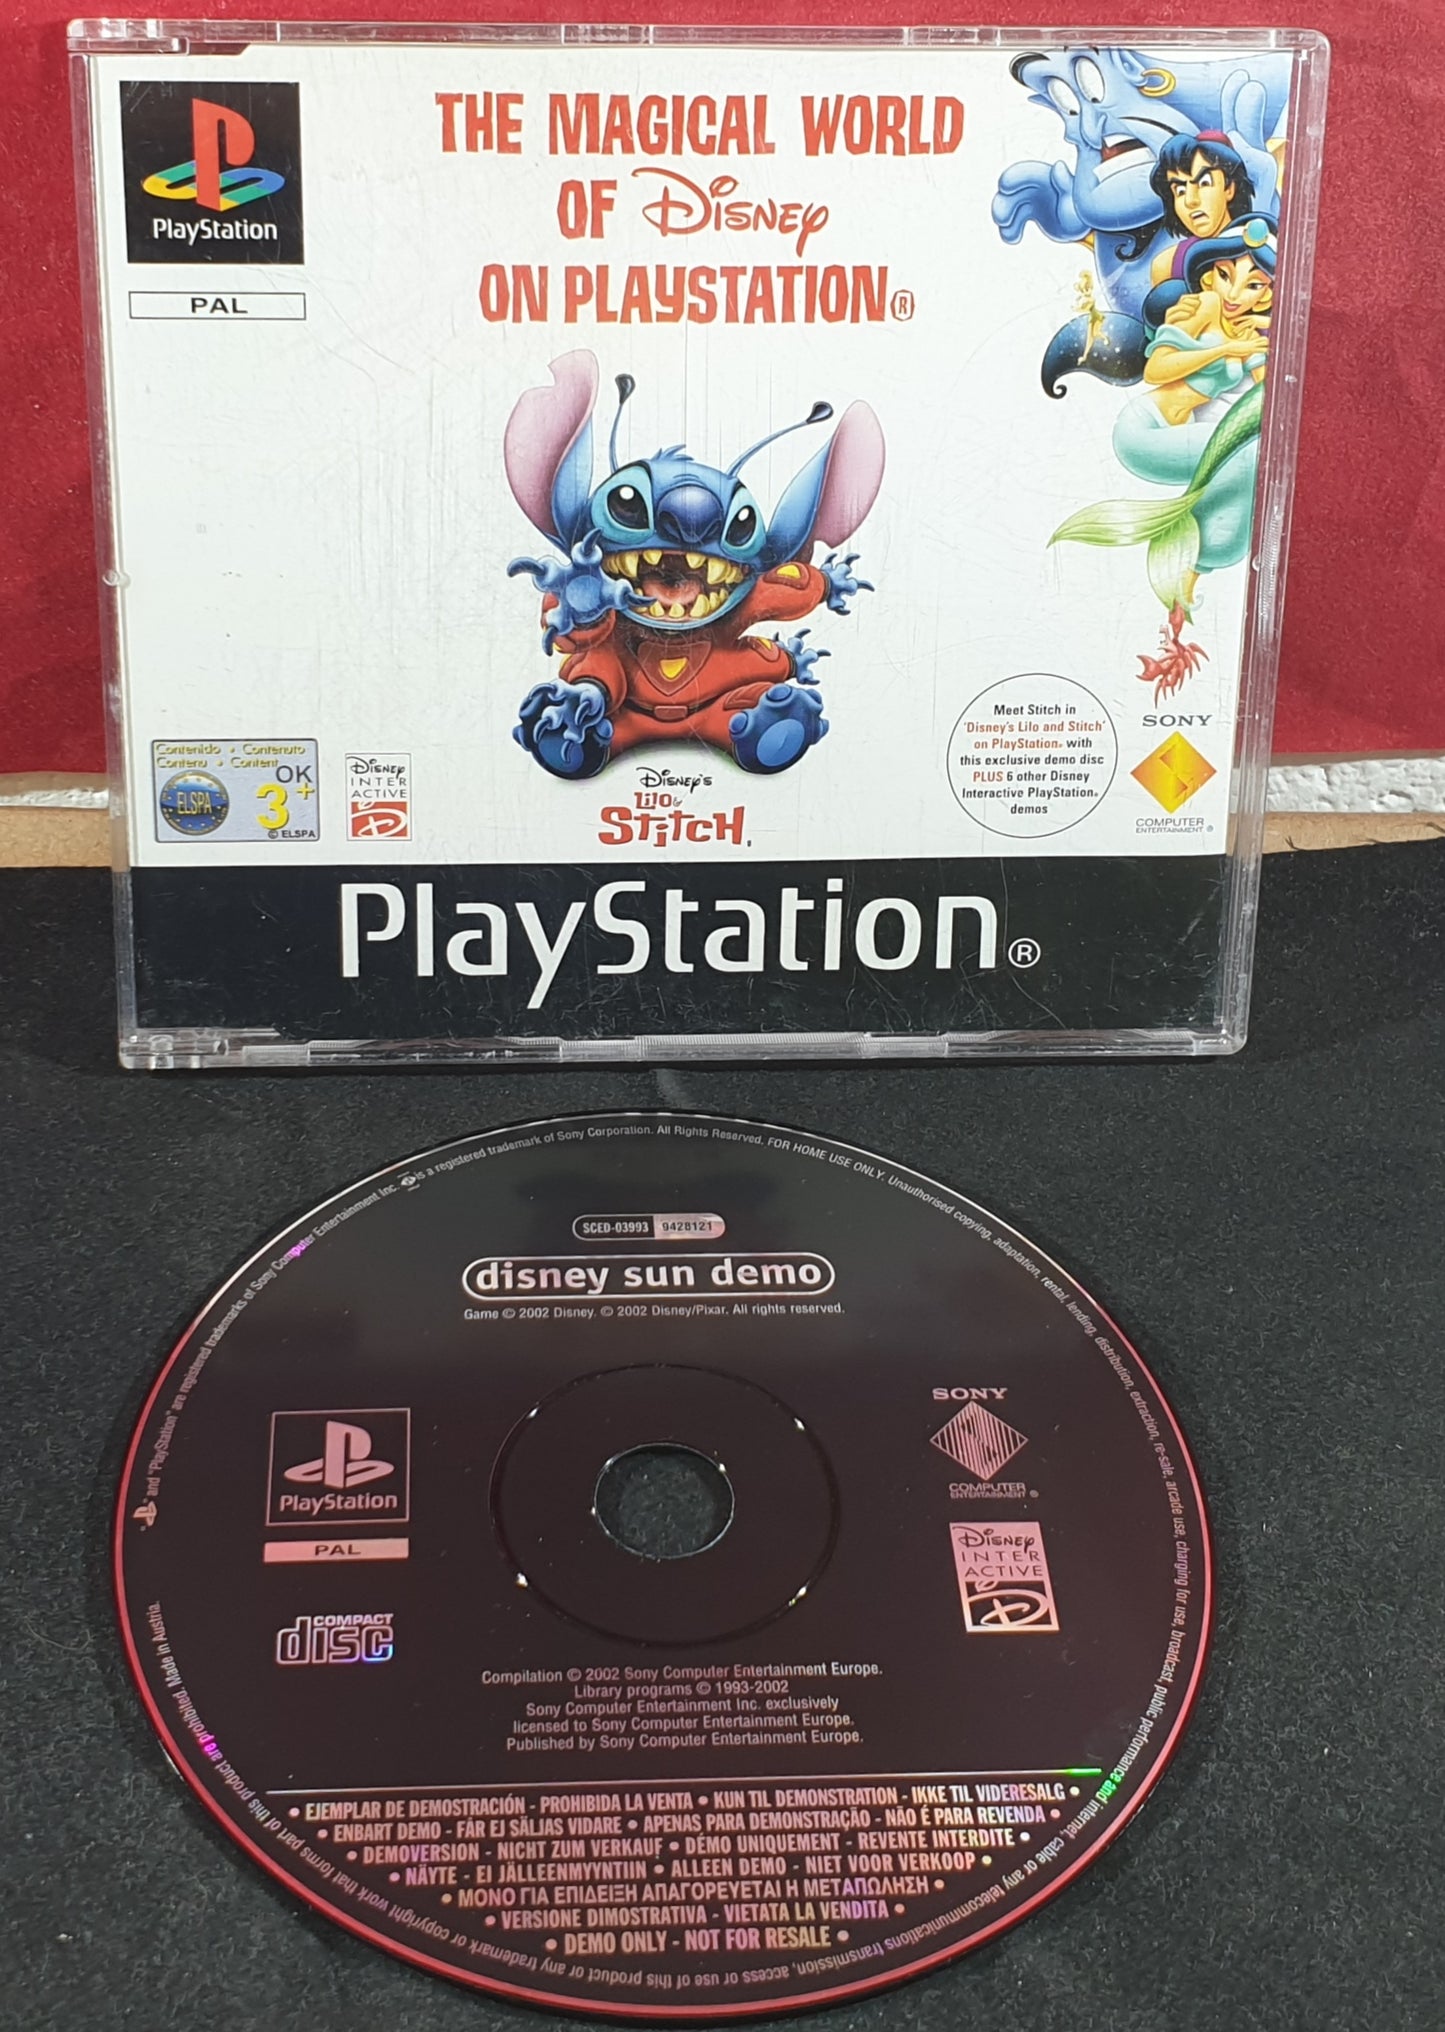 The Magical World of Disney Demo Disc from the Sun Sony Playstation 1 (PS1)